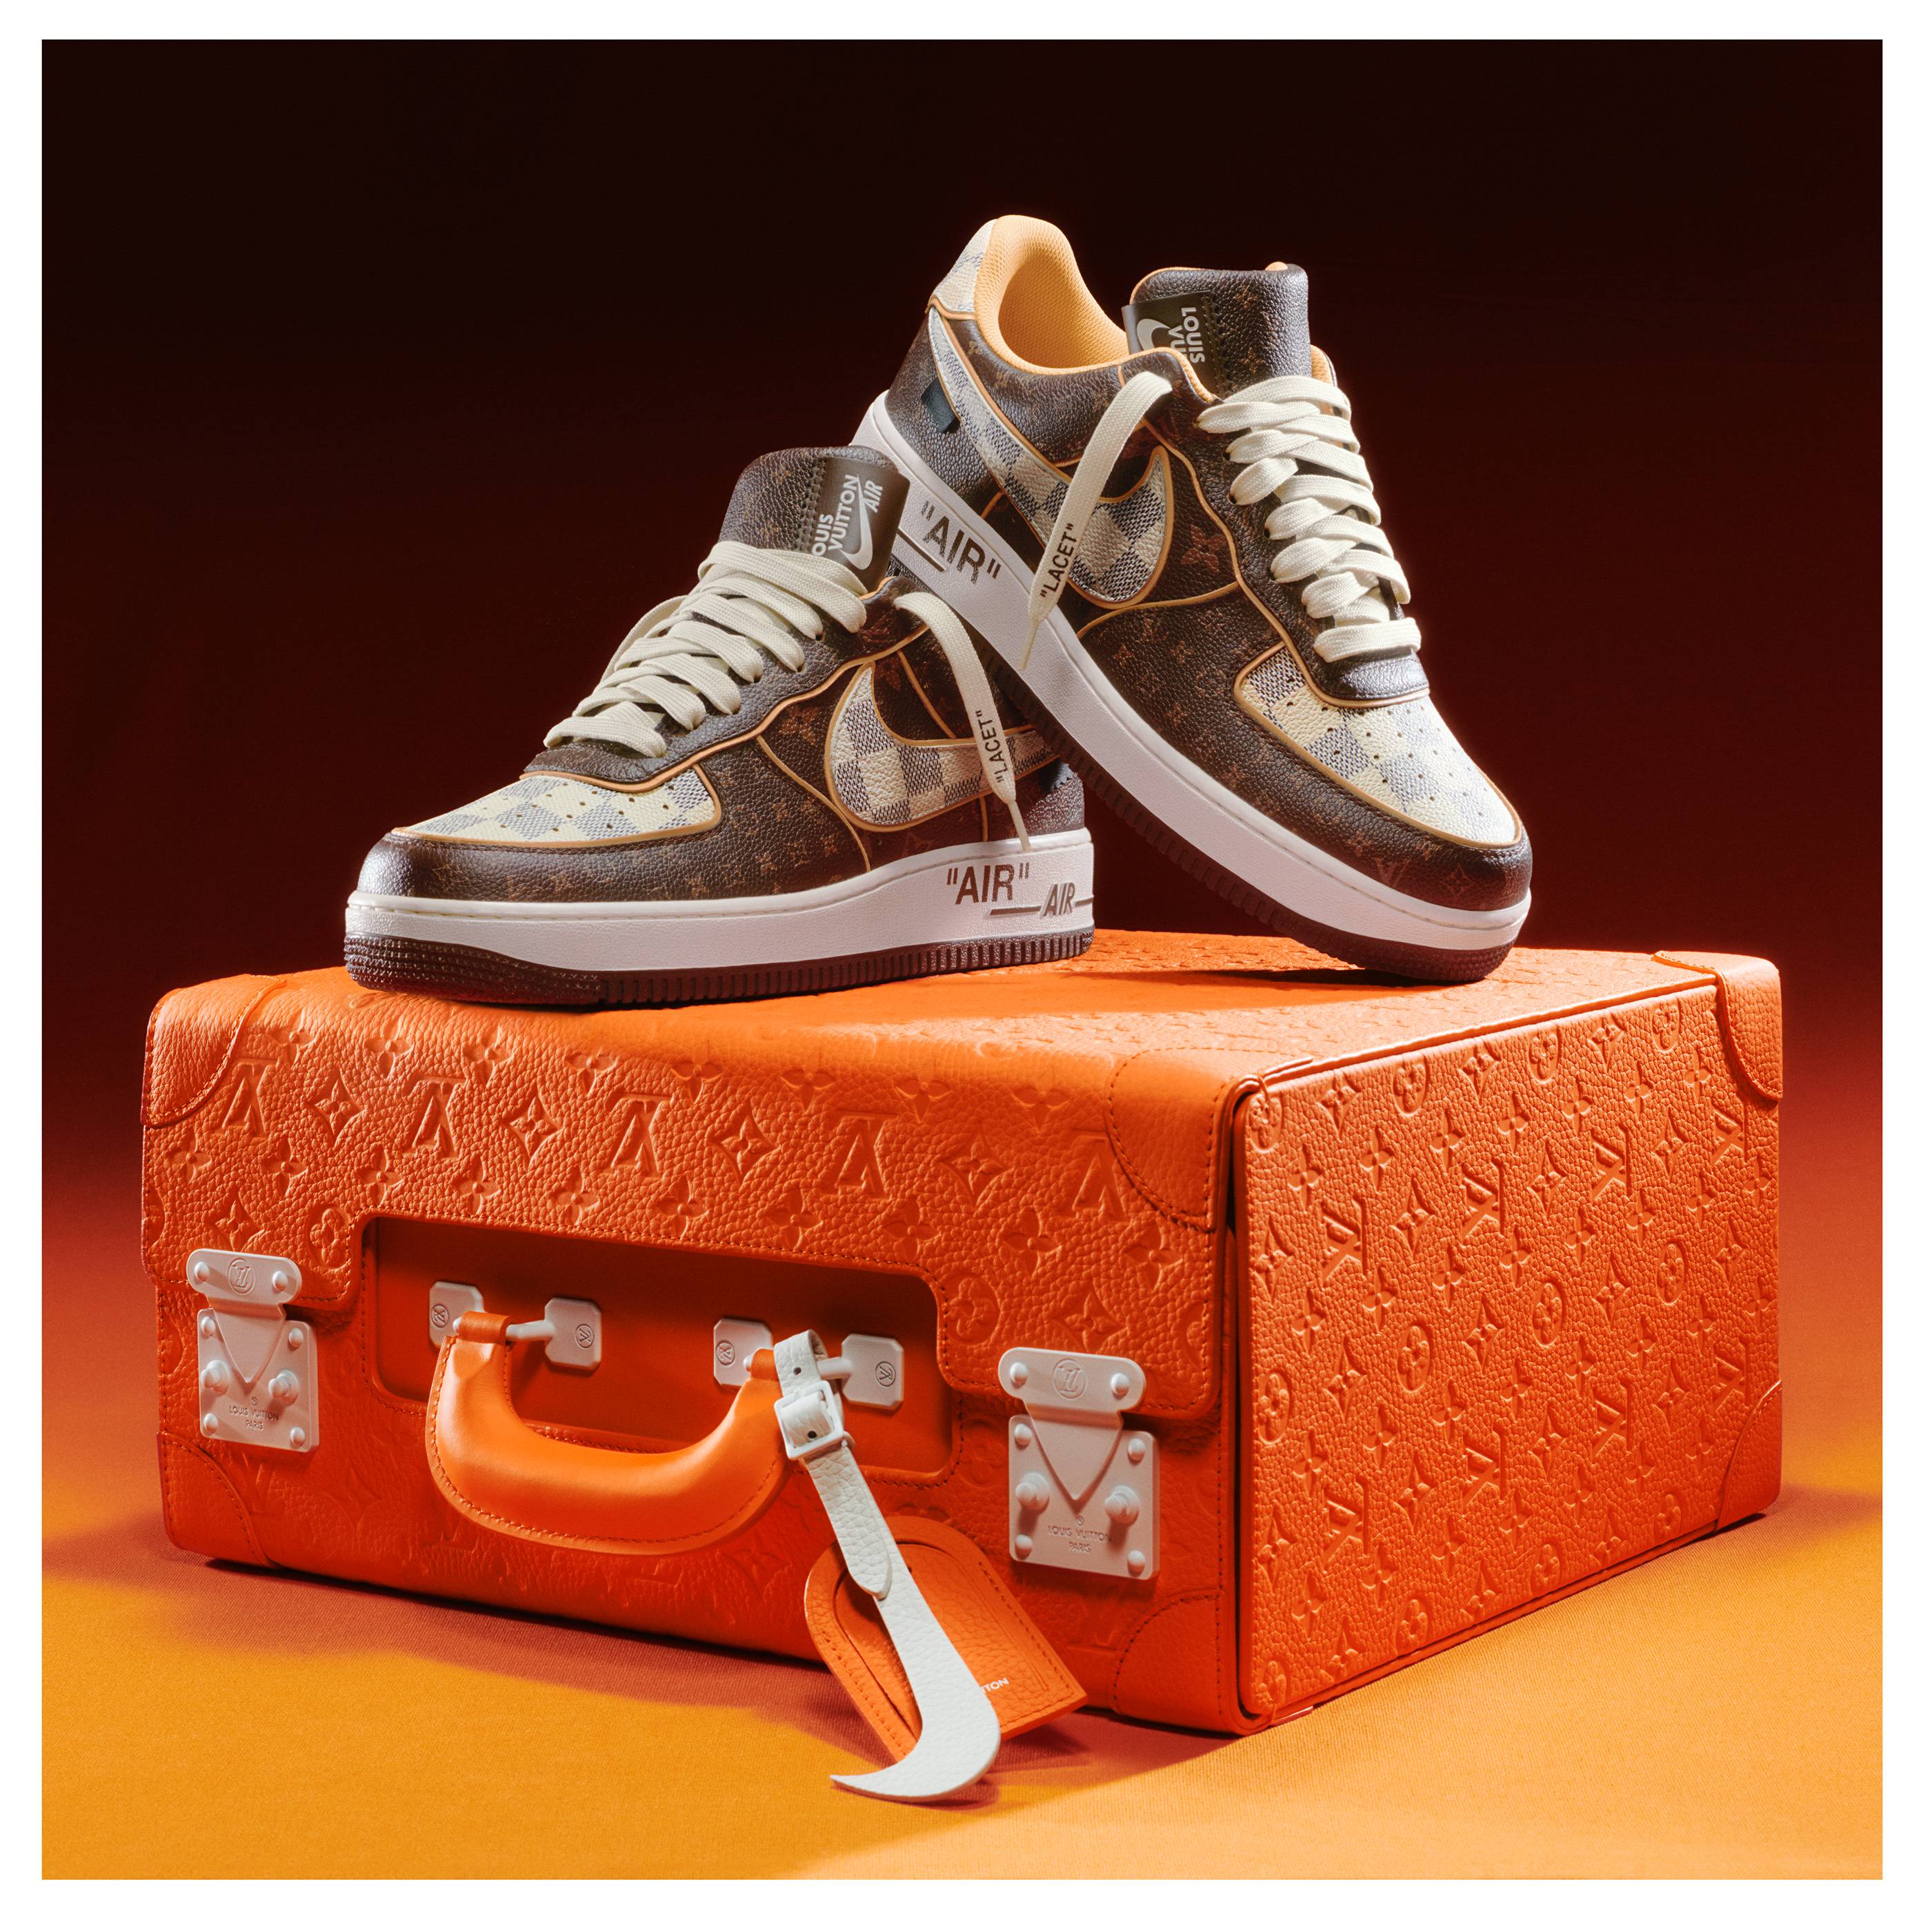 Nike x Louis Vuitton “Air Force 1” sneakers by Virgil Abloh. © Sotheby’s.